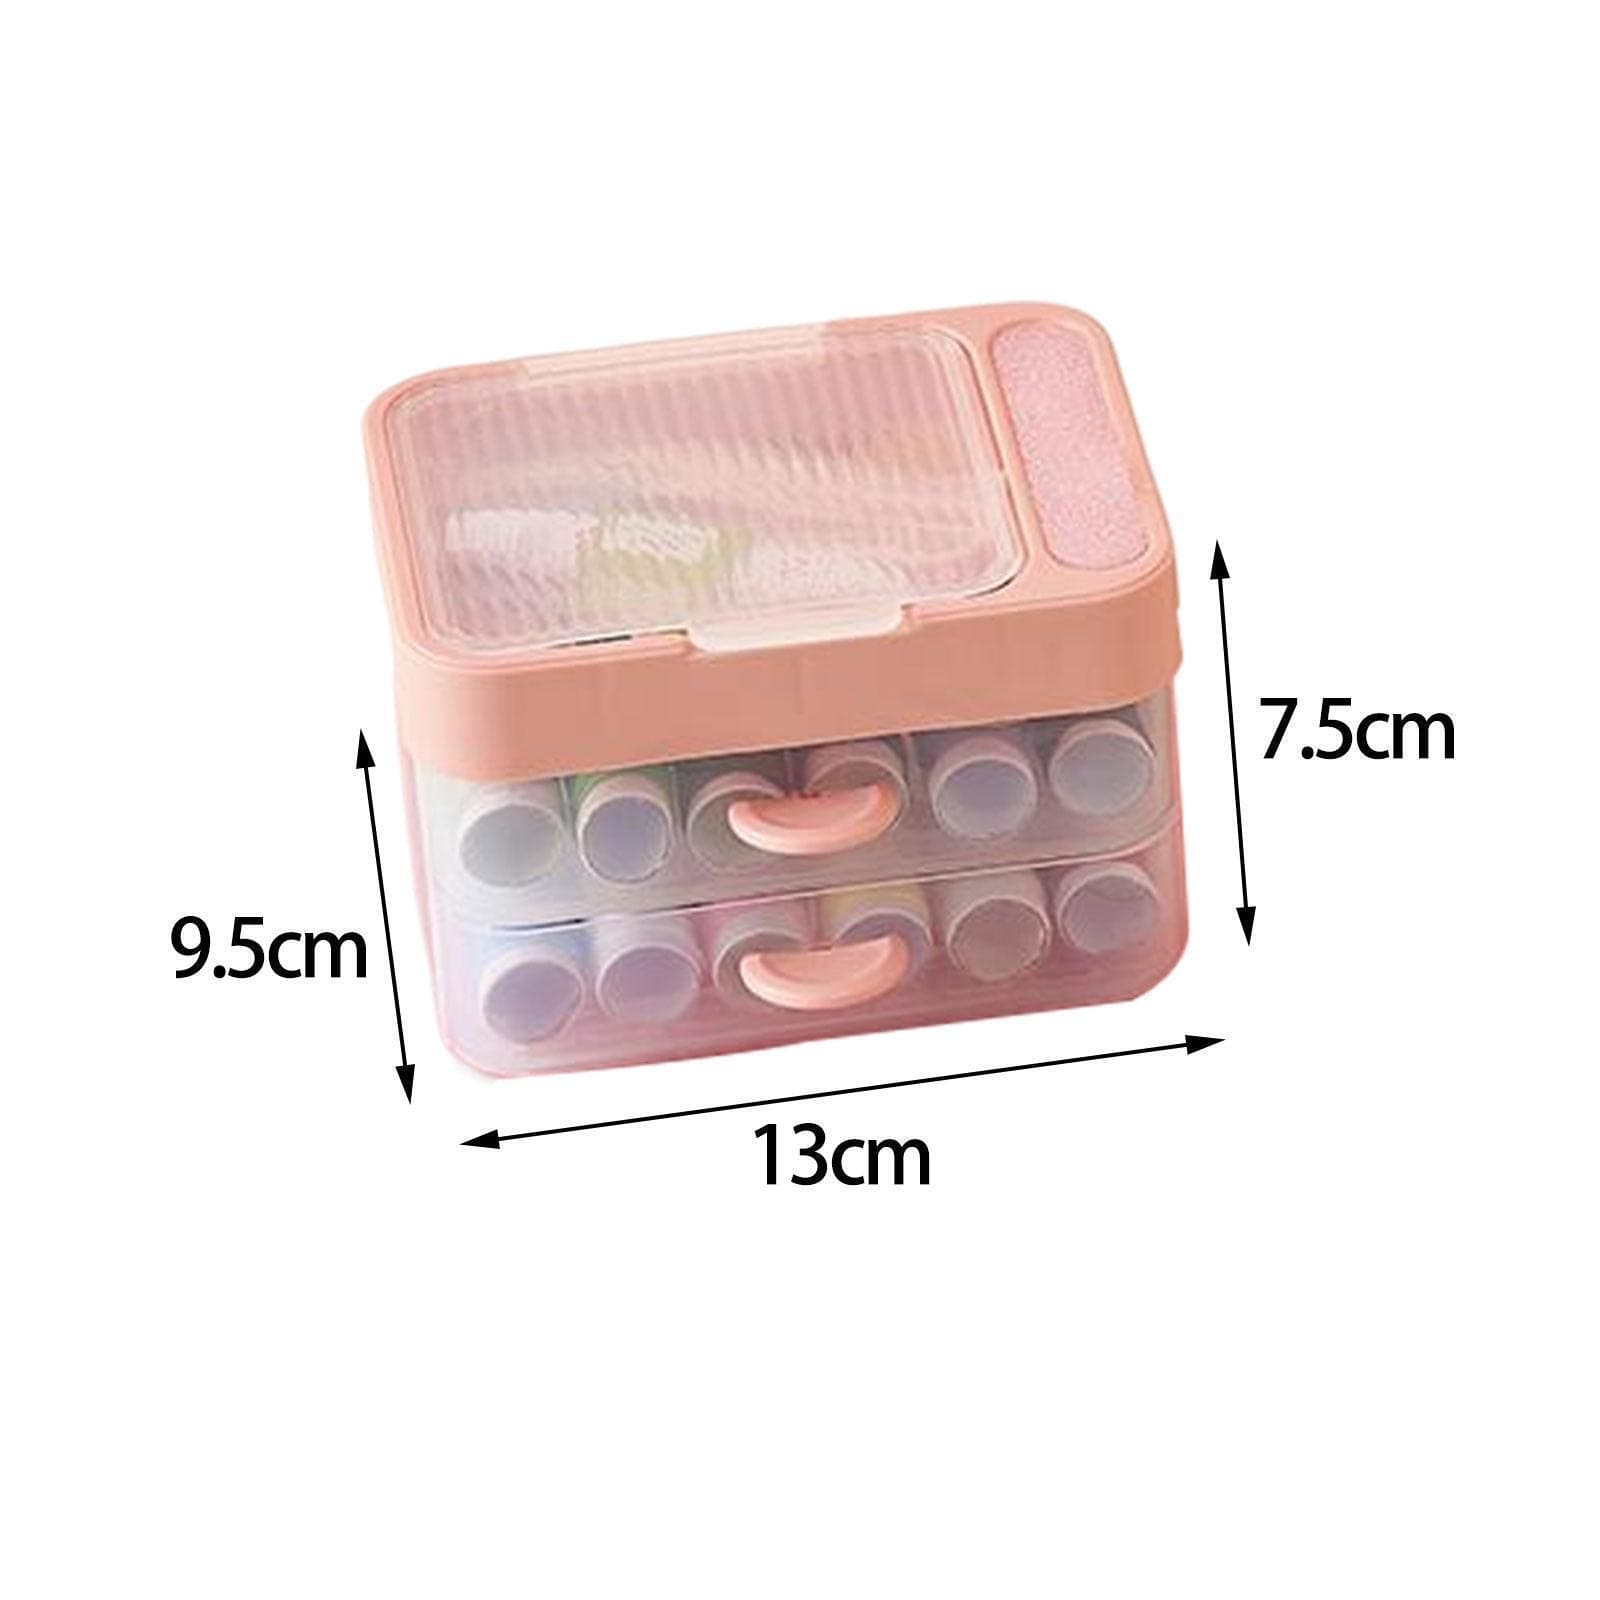 2 Layer Drawer Sewing Box, Portable Sewing Box With Sewing Accessories, Clothes Mending Essential, Basic Sewing Kit Accessory, Travel Small Sewing Kit, Home & Travelling Sewing Accessories